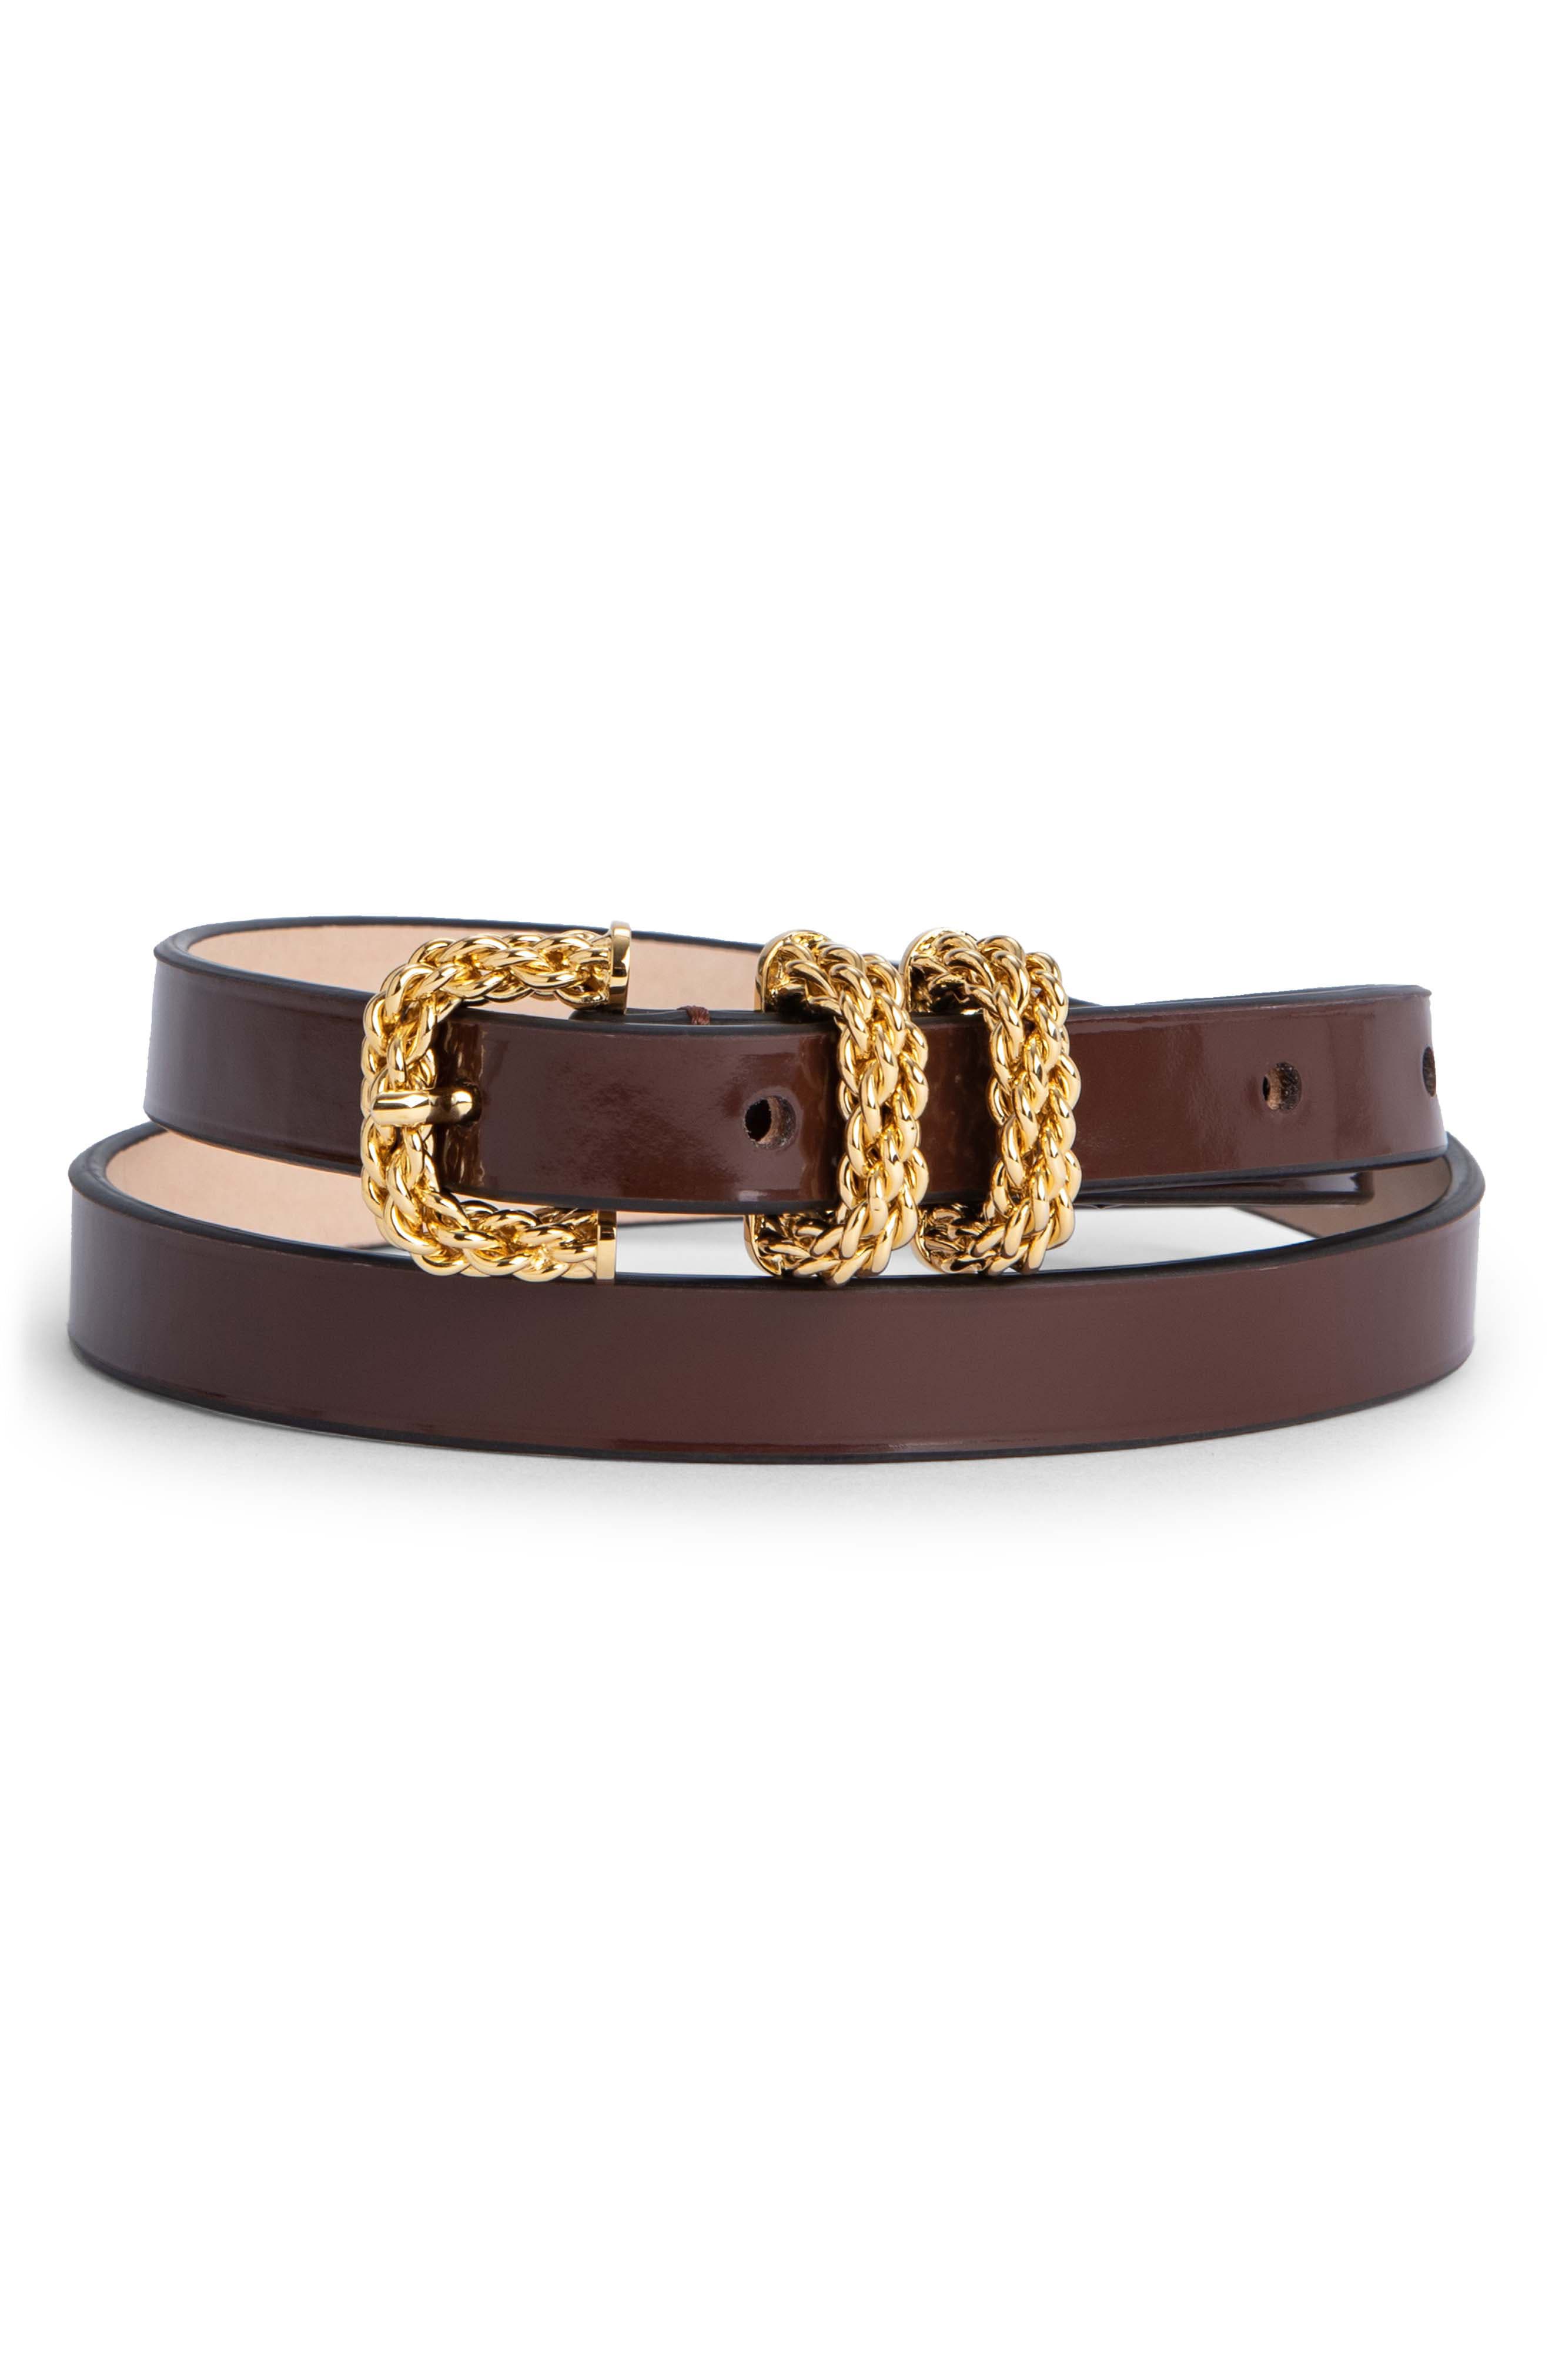 By Far Kat Semi Patent Leather Belt in Brown at Nordstrom, Size Small